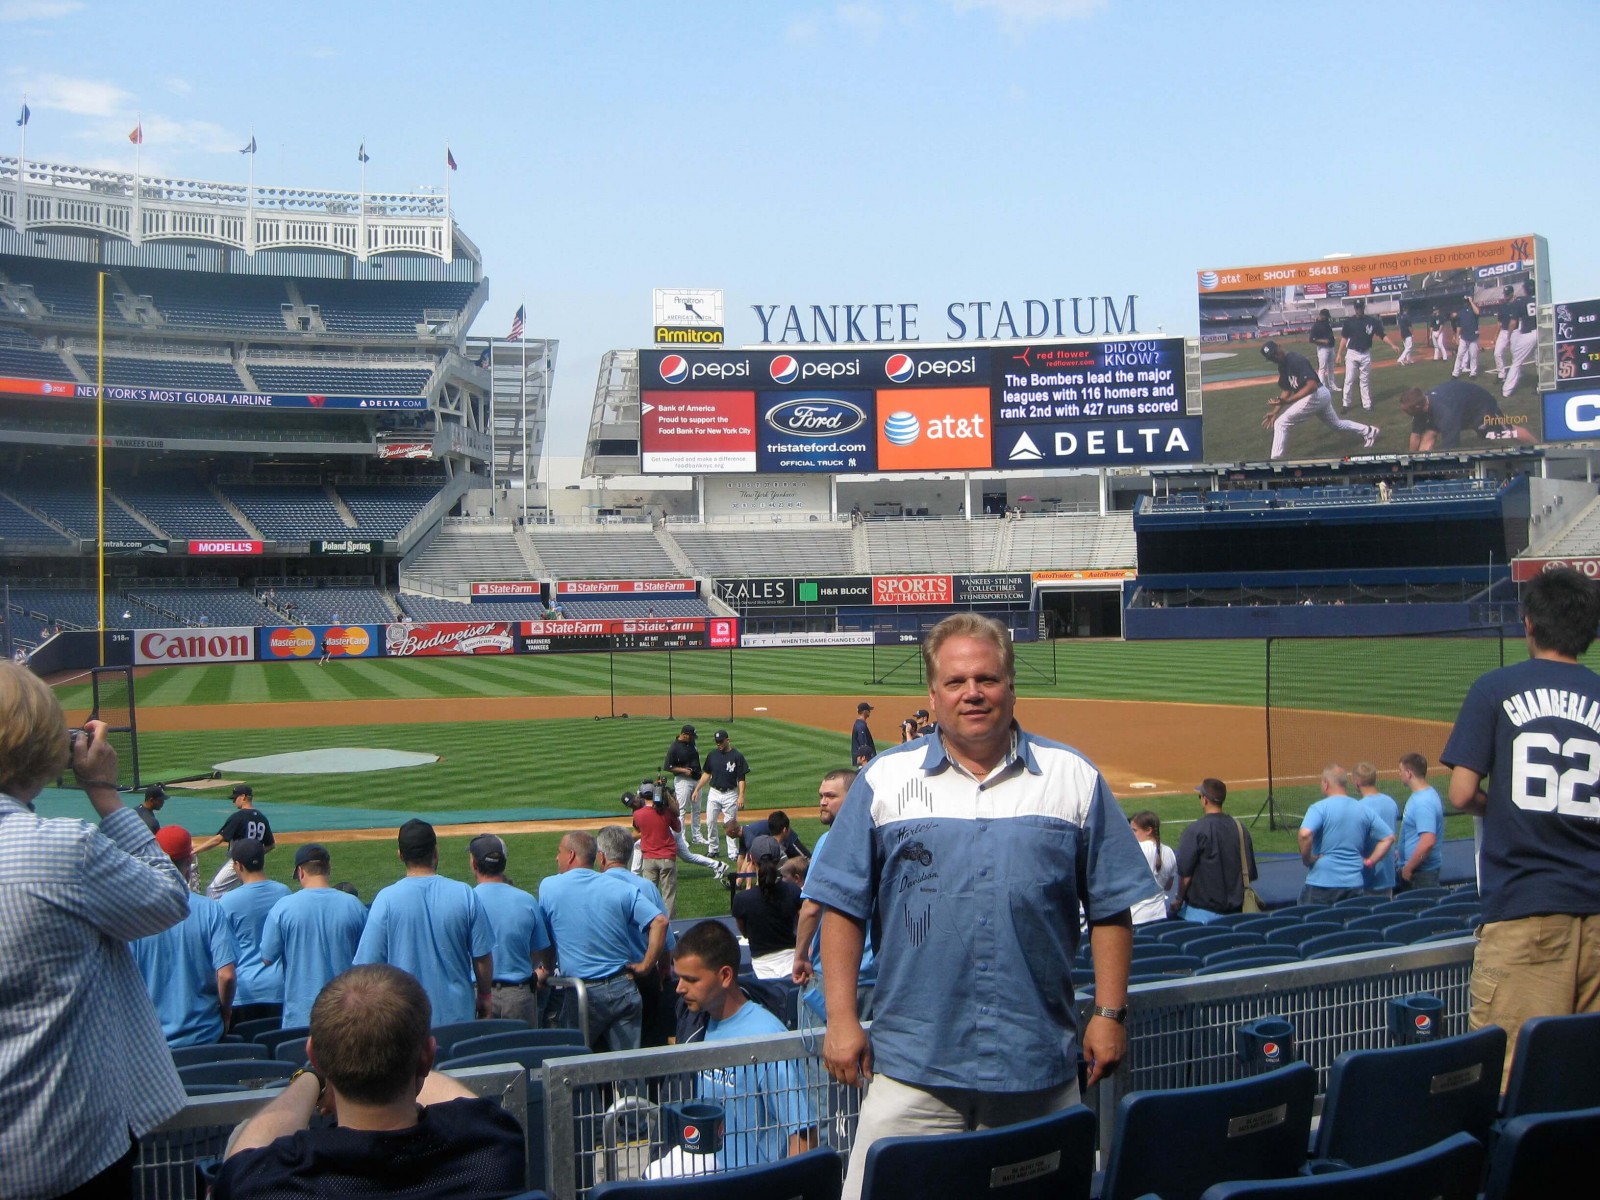 An older photo, but one of my favorite boys' trip -- 8 stadiums in 8 days.  I'm a Yankees fan since Mantle & Marris.  Playing's now limited to whiffle-ball and I don't watch much until October, but I sure love crossing MLB stadiums off my bucket list.